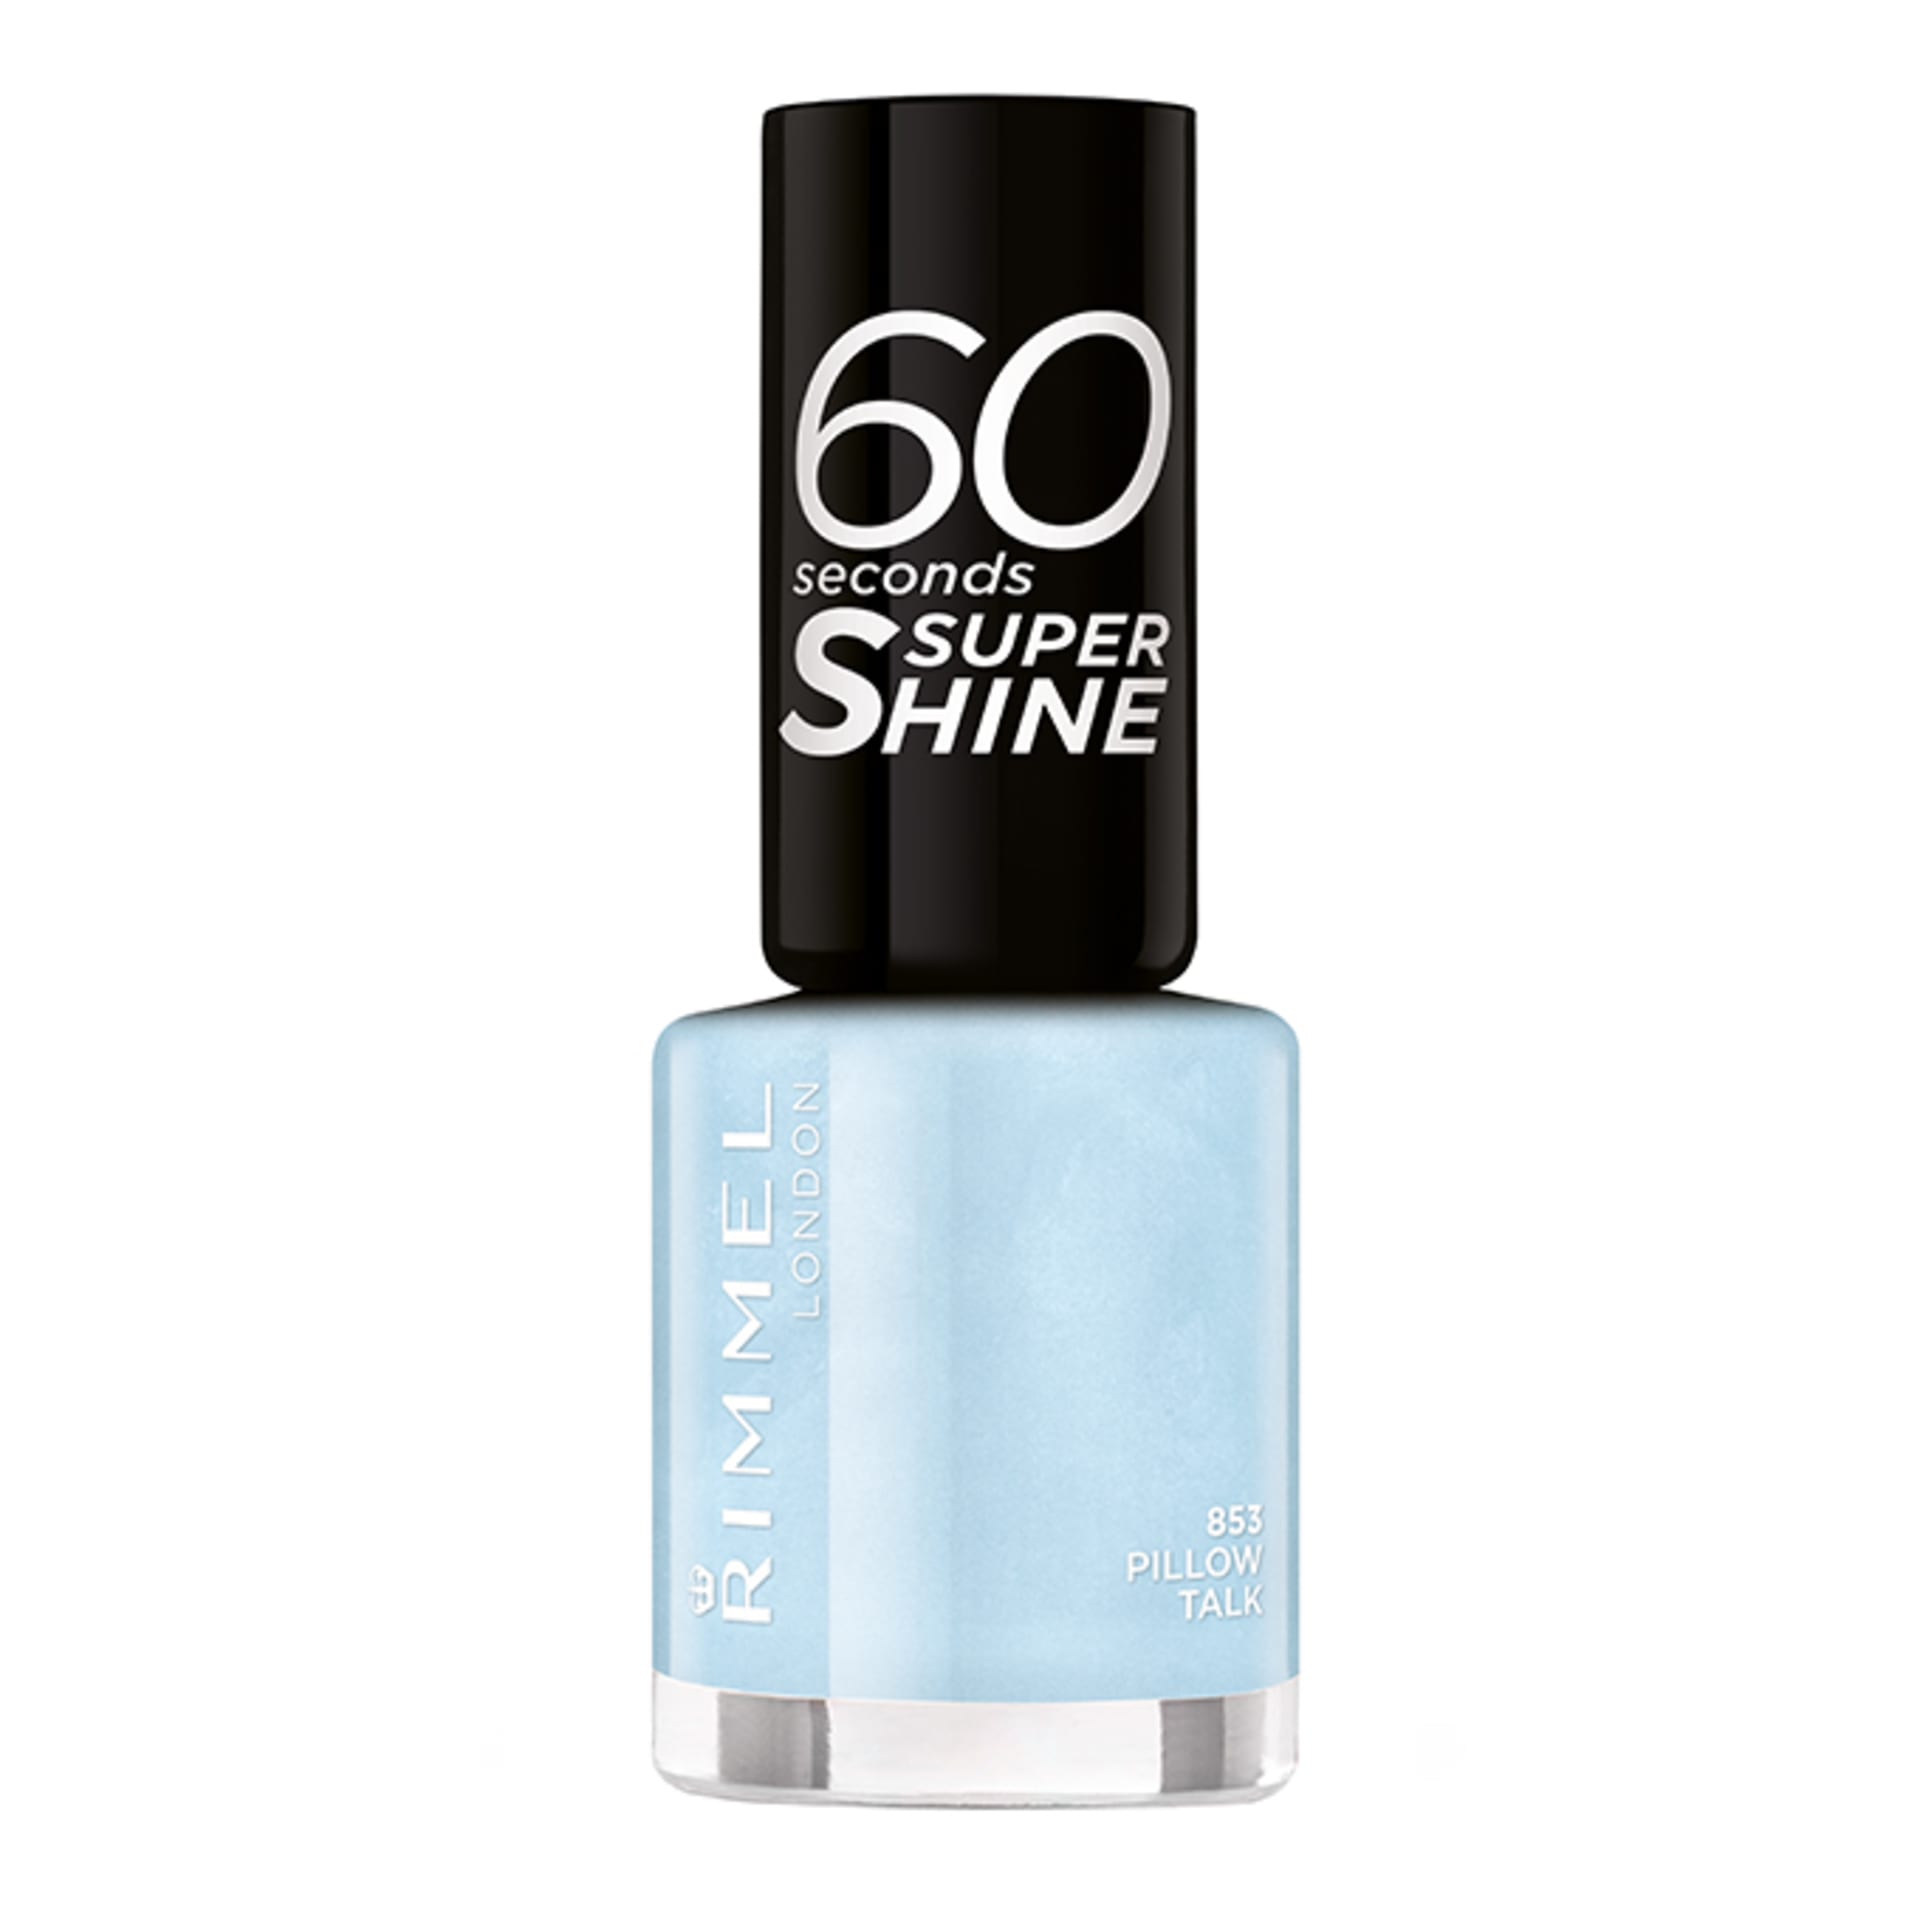 Rimmel, 60 Seconds Super Shine Nail Polish - Go Wild-er-ness. This purple  shade is such a pretty colour nail varnish. It's… | Nail polish, Shine nails,  Nail varnish